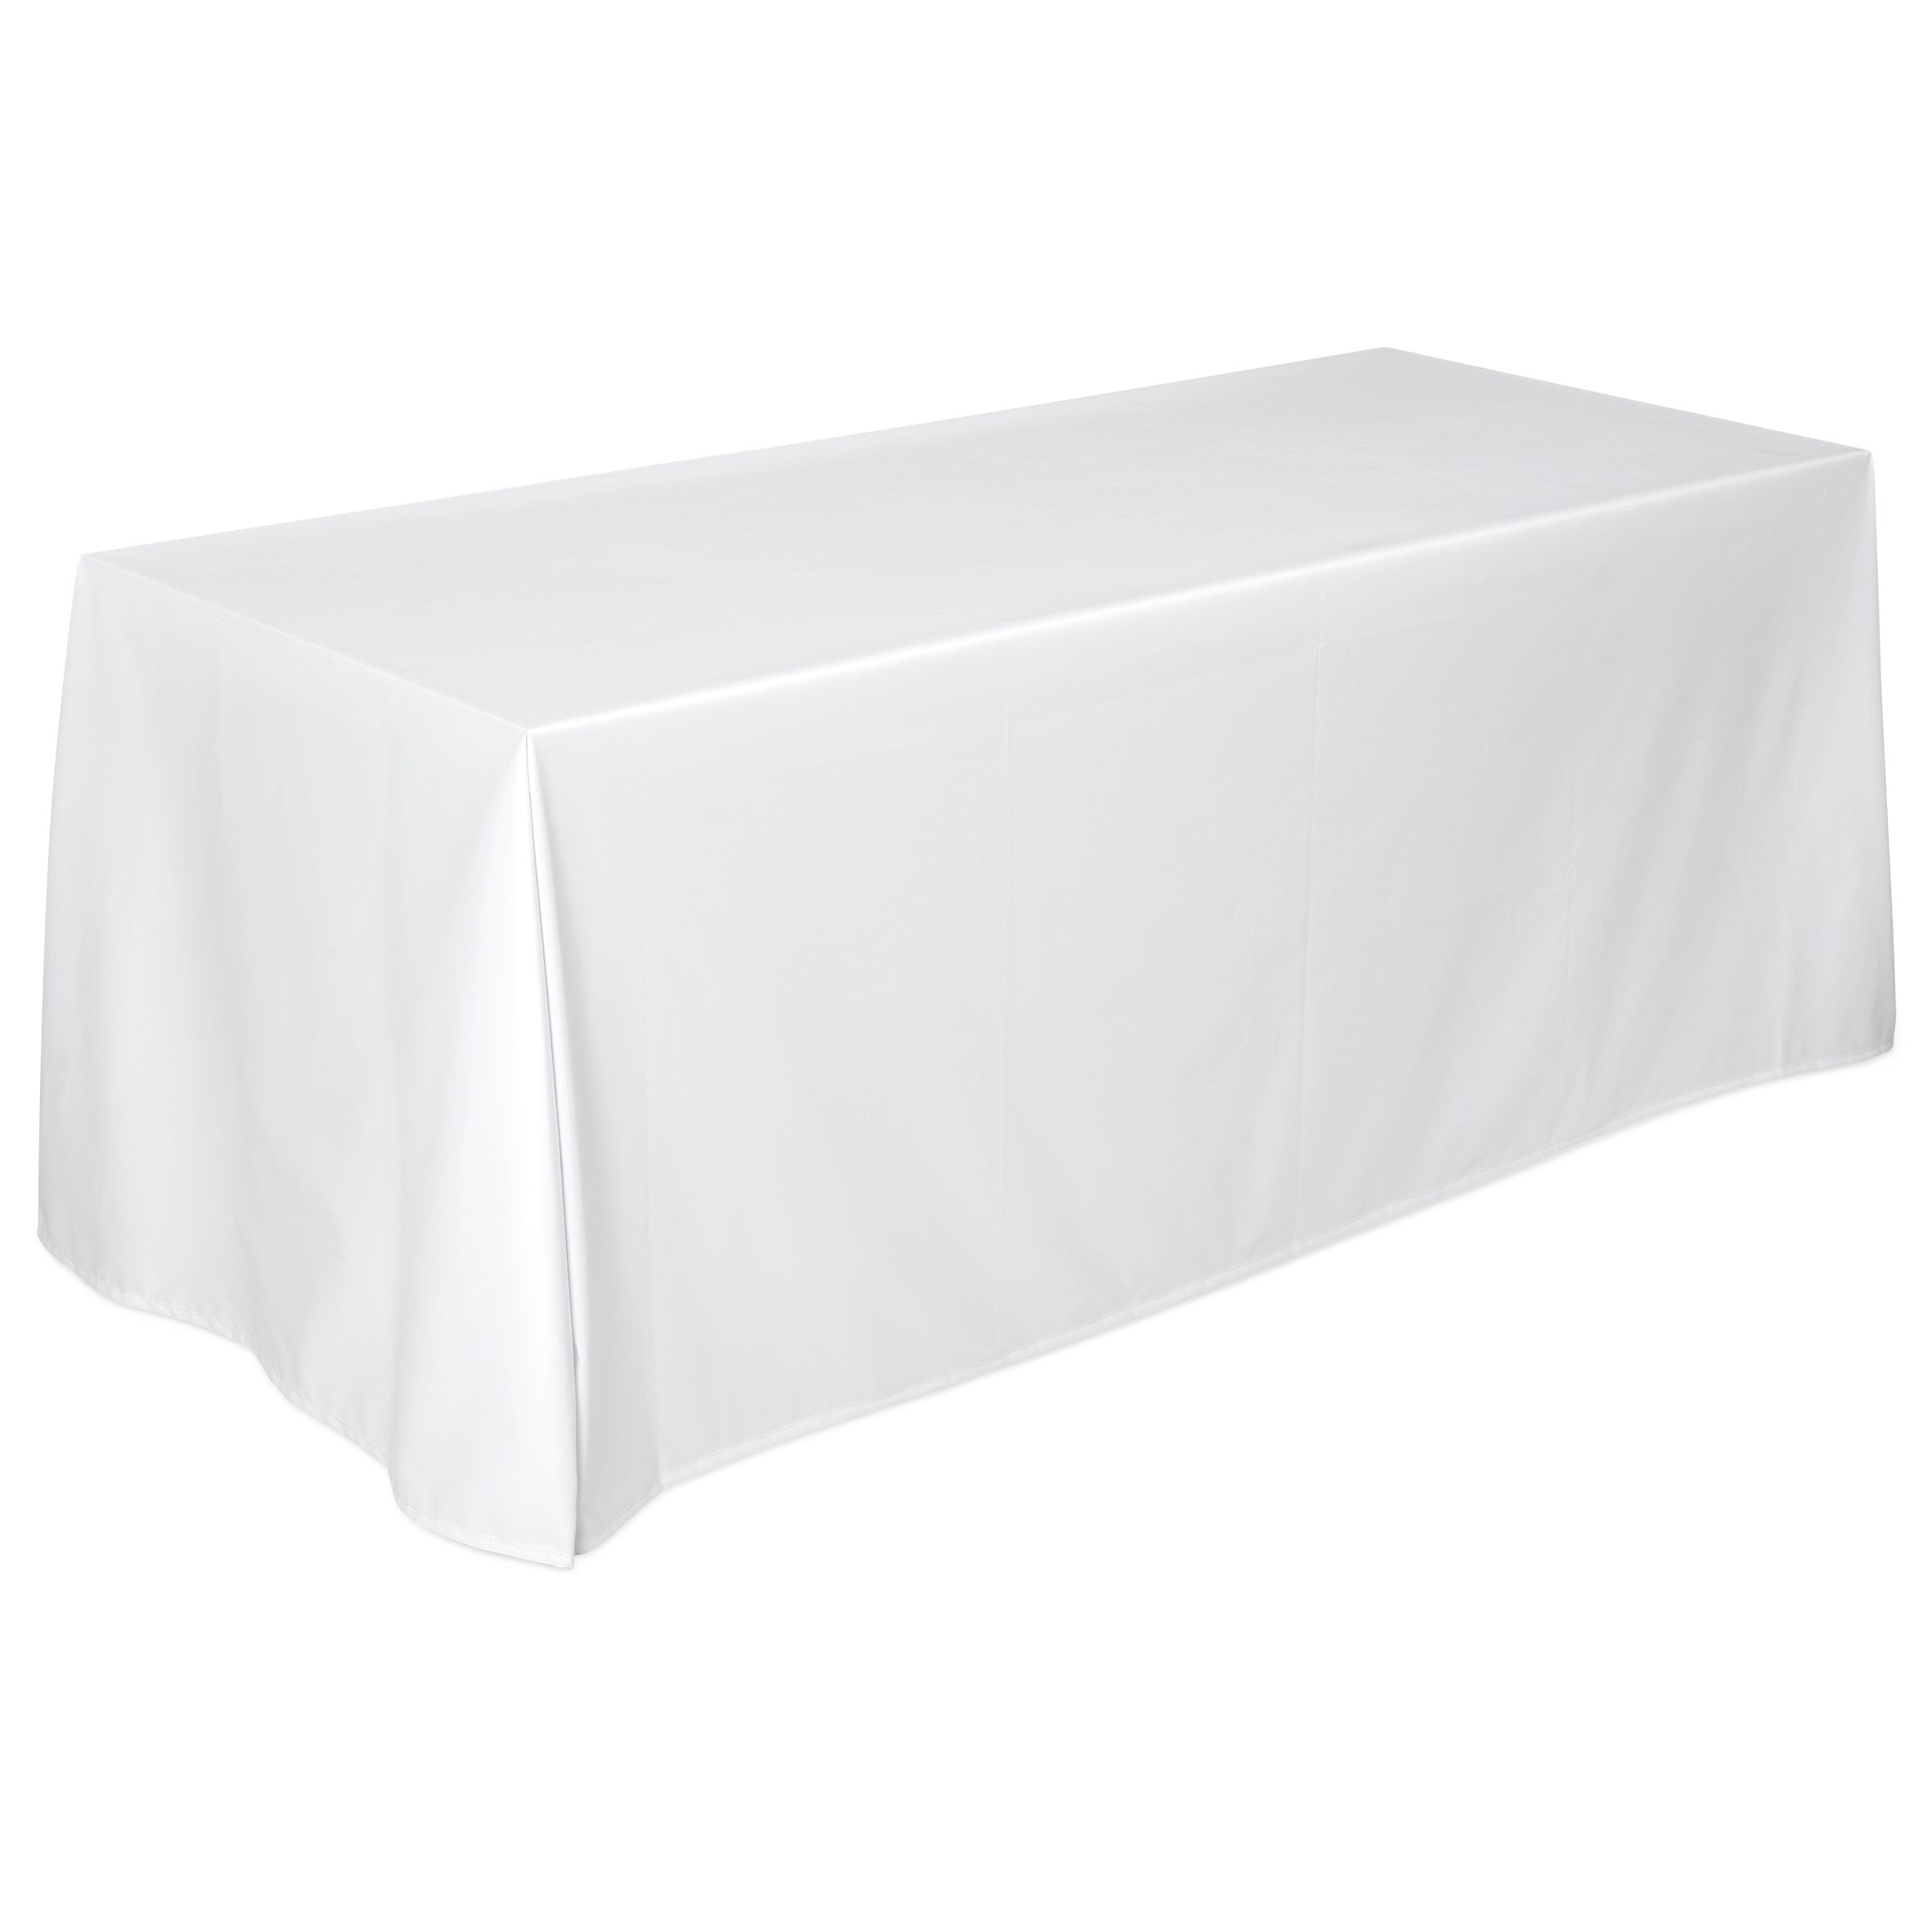 Legend Fabric Tablecloth 3.35m x 2.25m - Banners